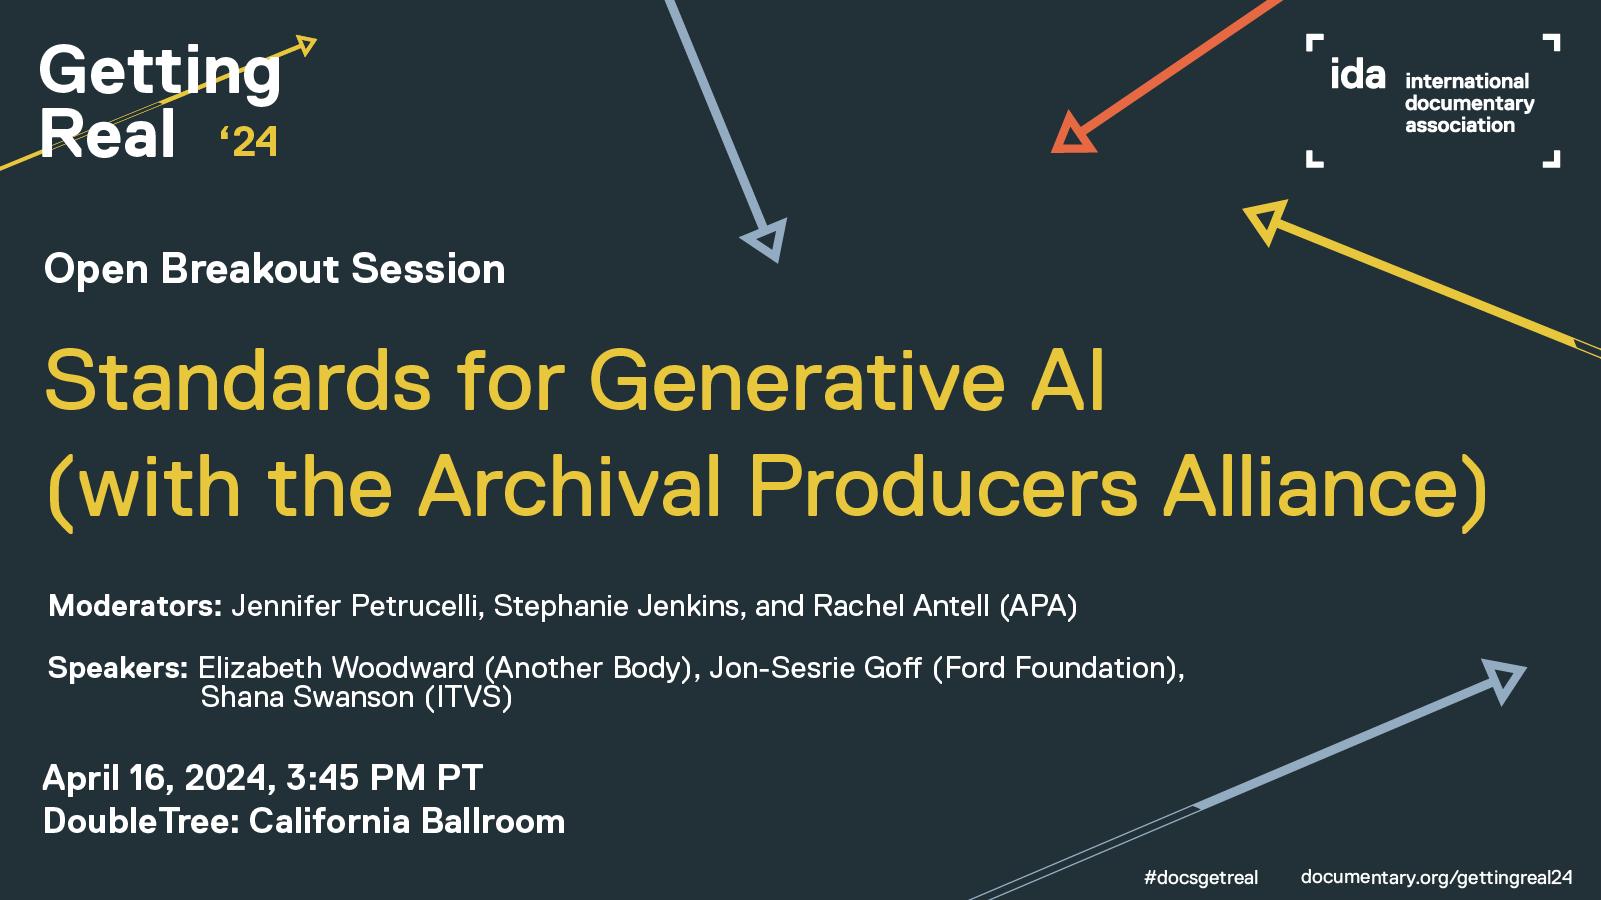 3:45PM Open Breakout Session: Standards for Generative AI (with the Archival Producers Alliance)